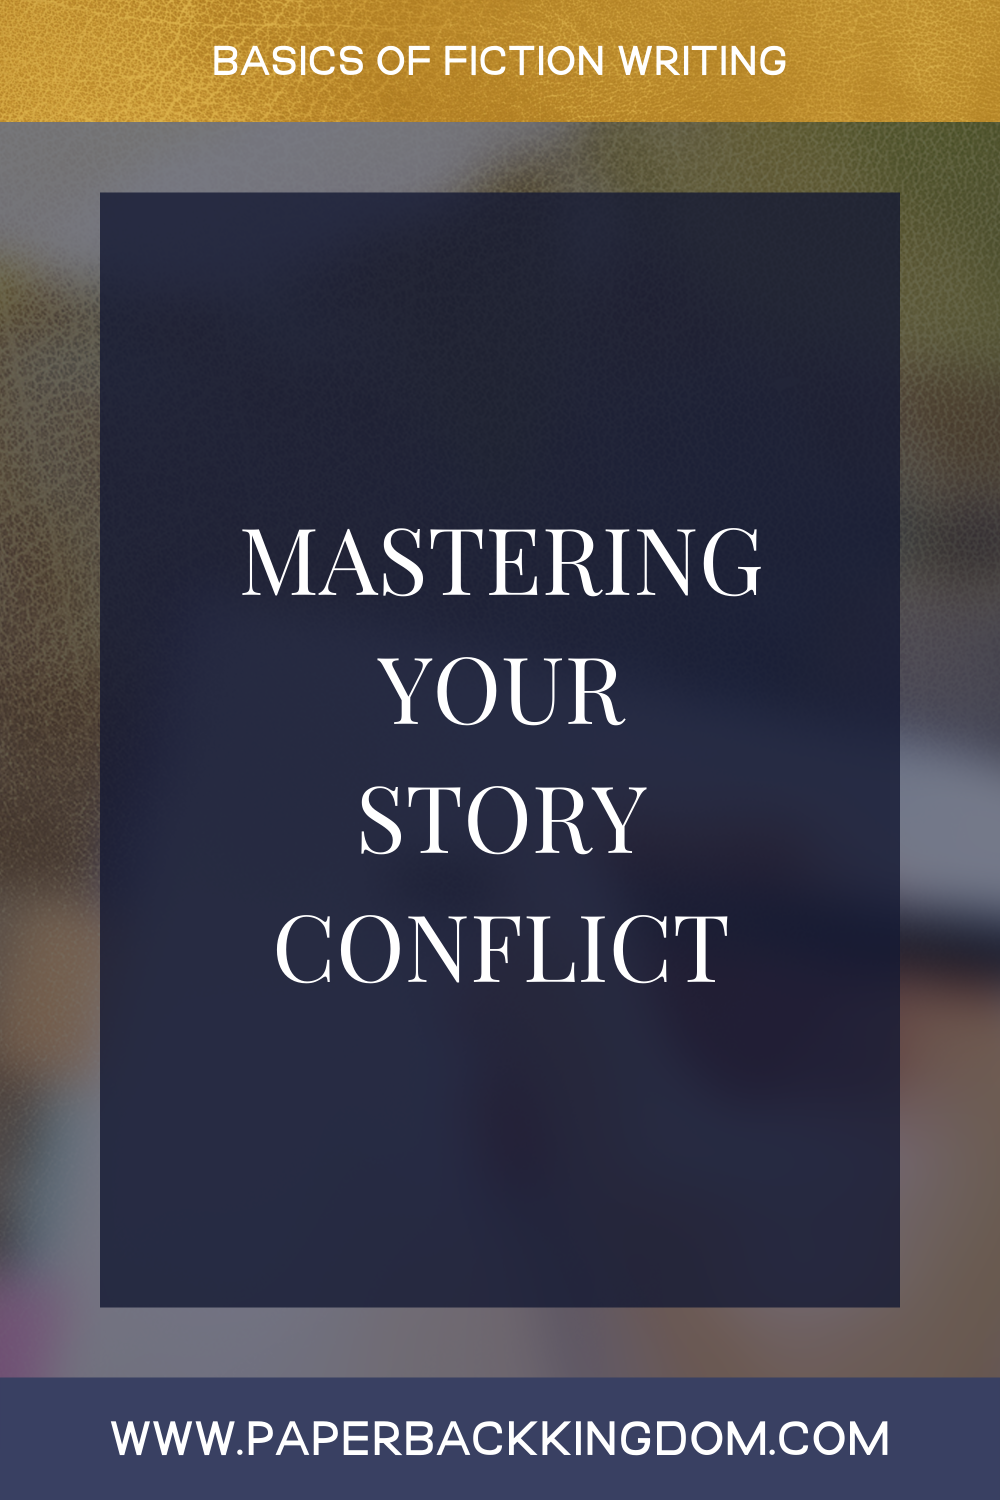 Mastering Your Story Conflict - A good story conflict will grip a reader and hook them for the duration of your entire novel—but coming up with that perfect problem or plot twist, and being able to keep developing obstacles and raising the stakes is sometimes a challenge. In today’s post I’m discussing some things that could be going wrong in your story conflict and how you can go about fixing them.